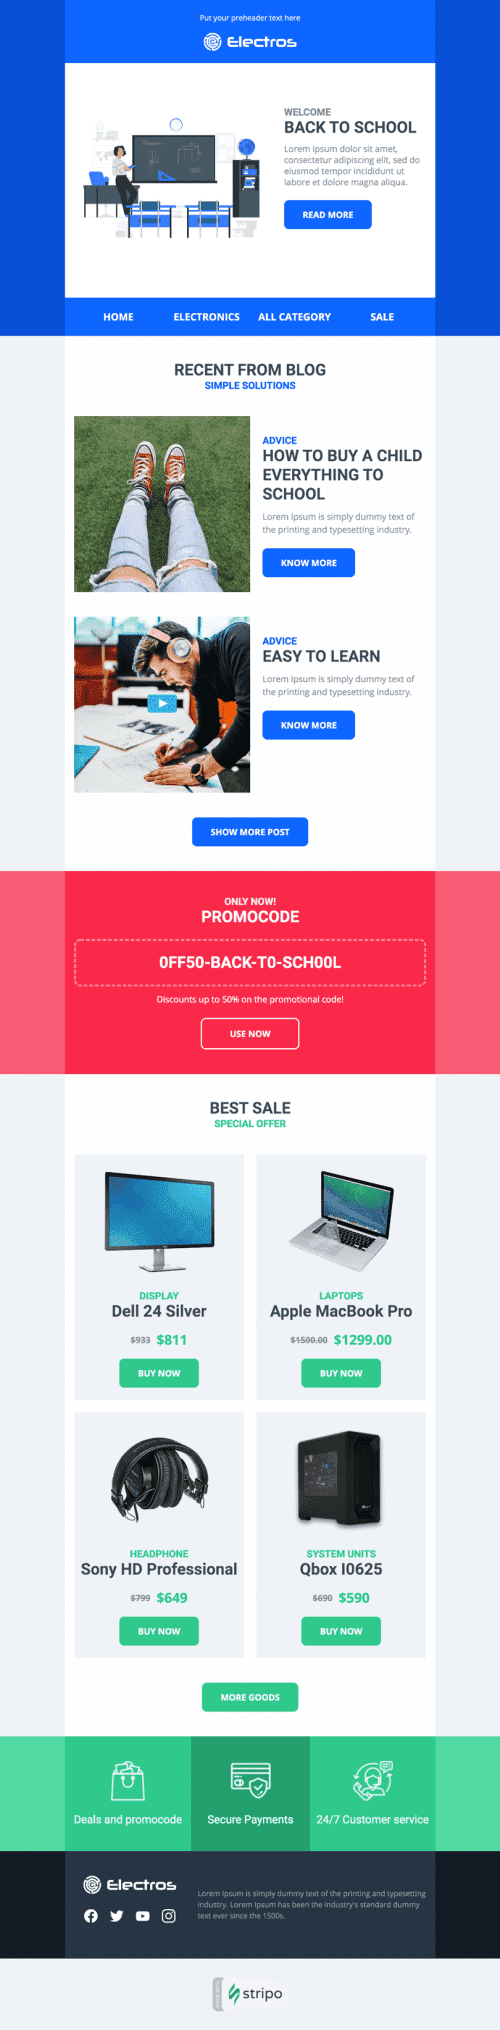 Back to School Email Template «Path to knowledge» for Gadgets industrydesktop view